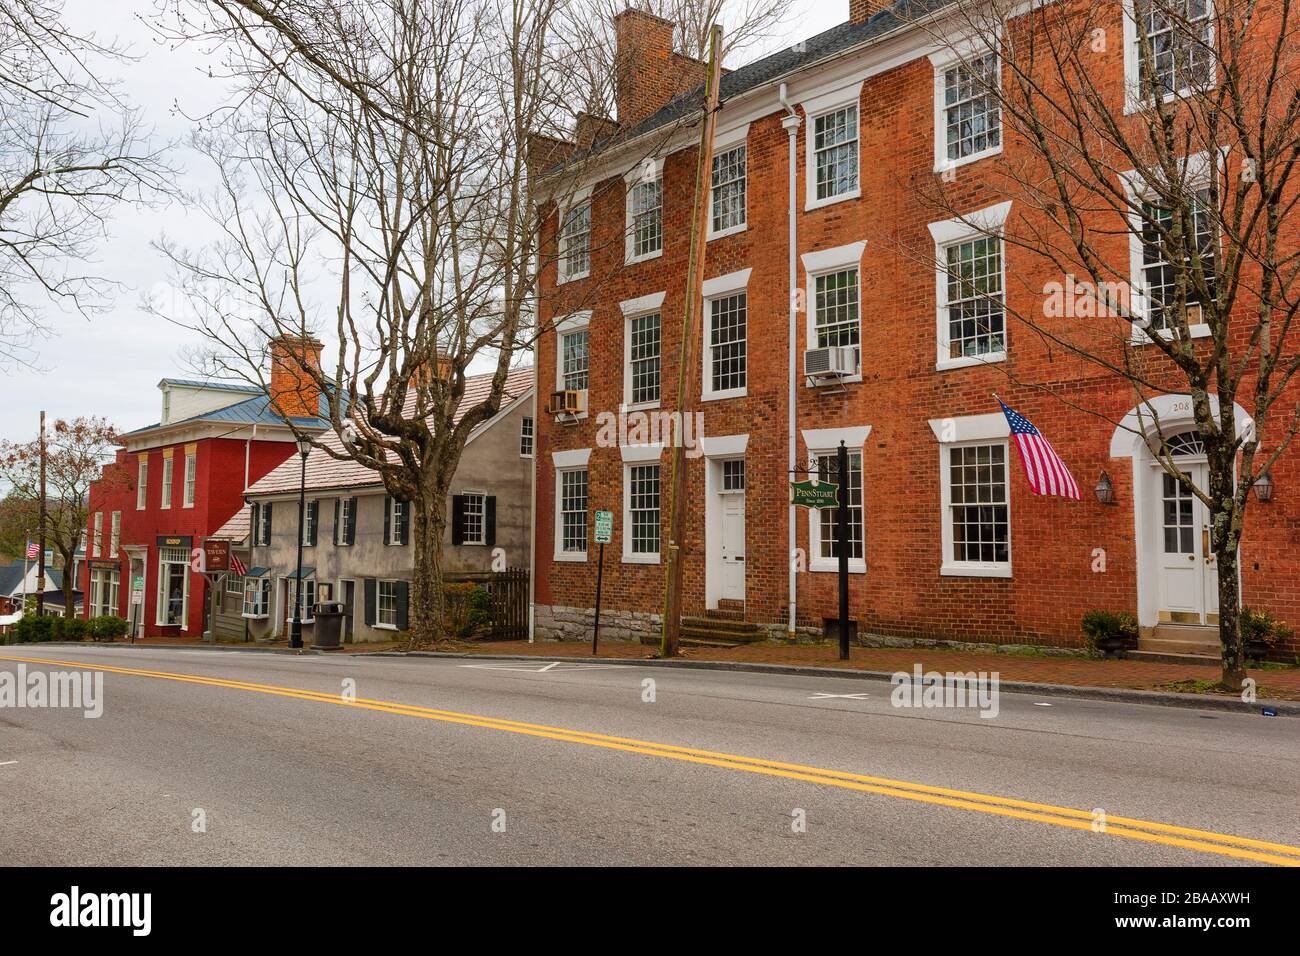 Abingdon,Virginia,USA - March 23,2020:  No one around this usually busy street filled with tourist in the historical section of Abingdon, Virginia Stock Photo